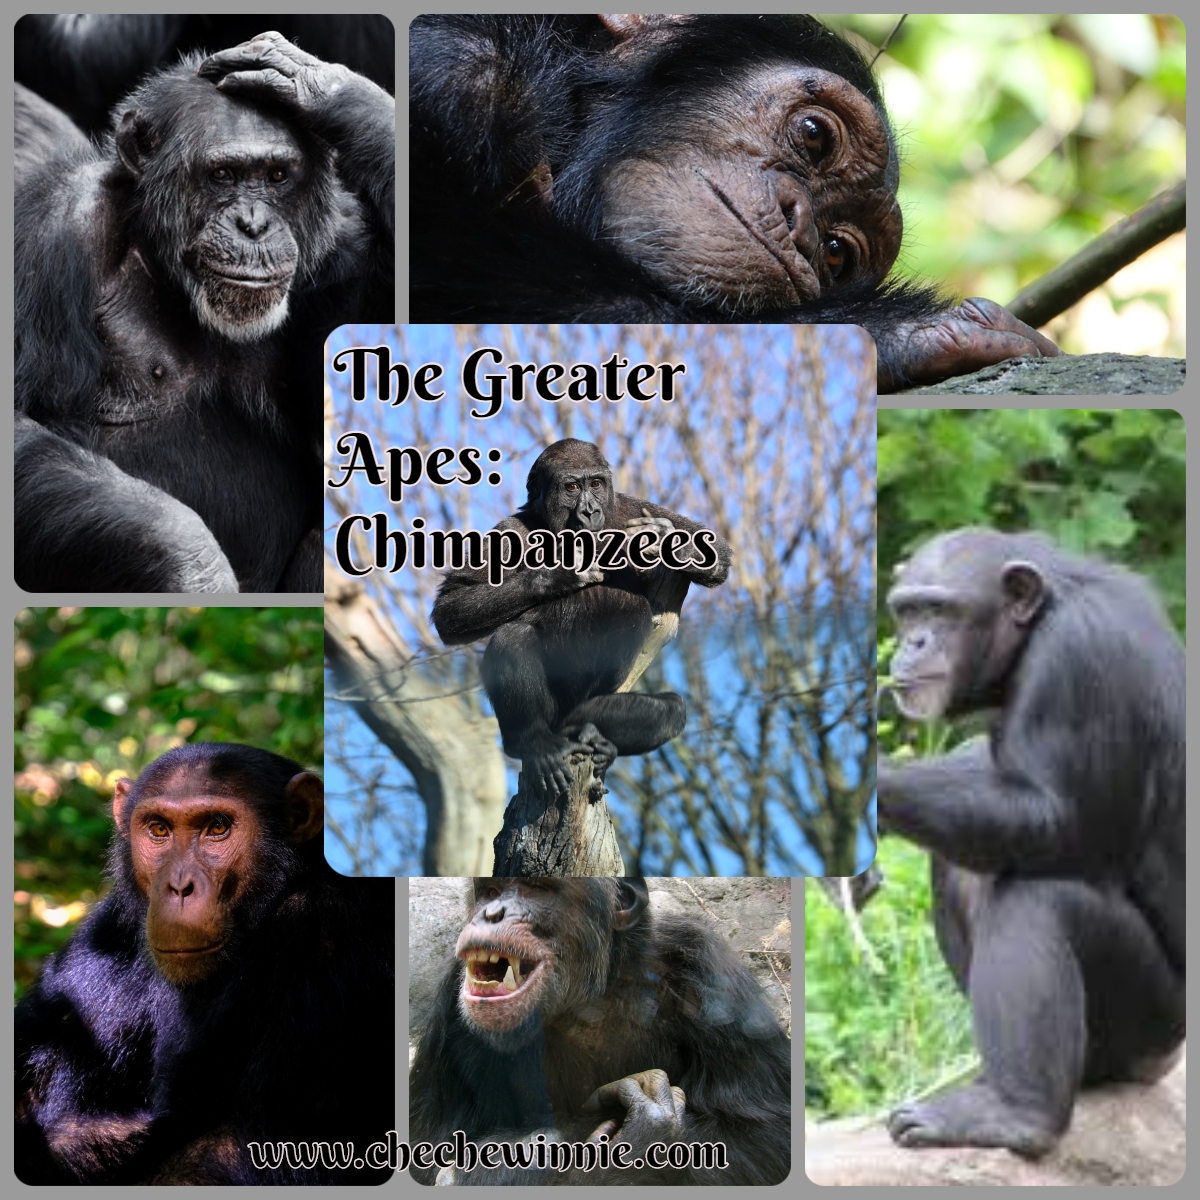 The Greater Apes: Chimpanzees